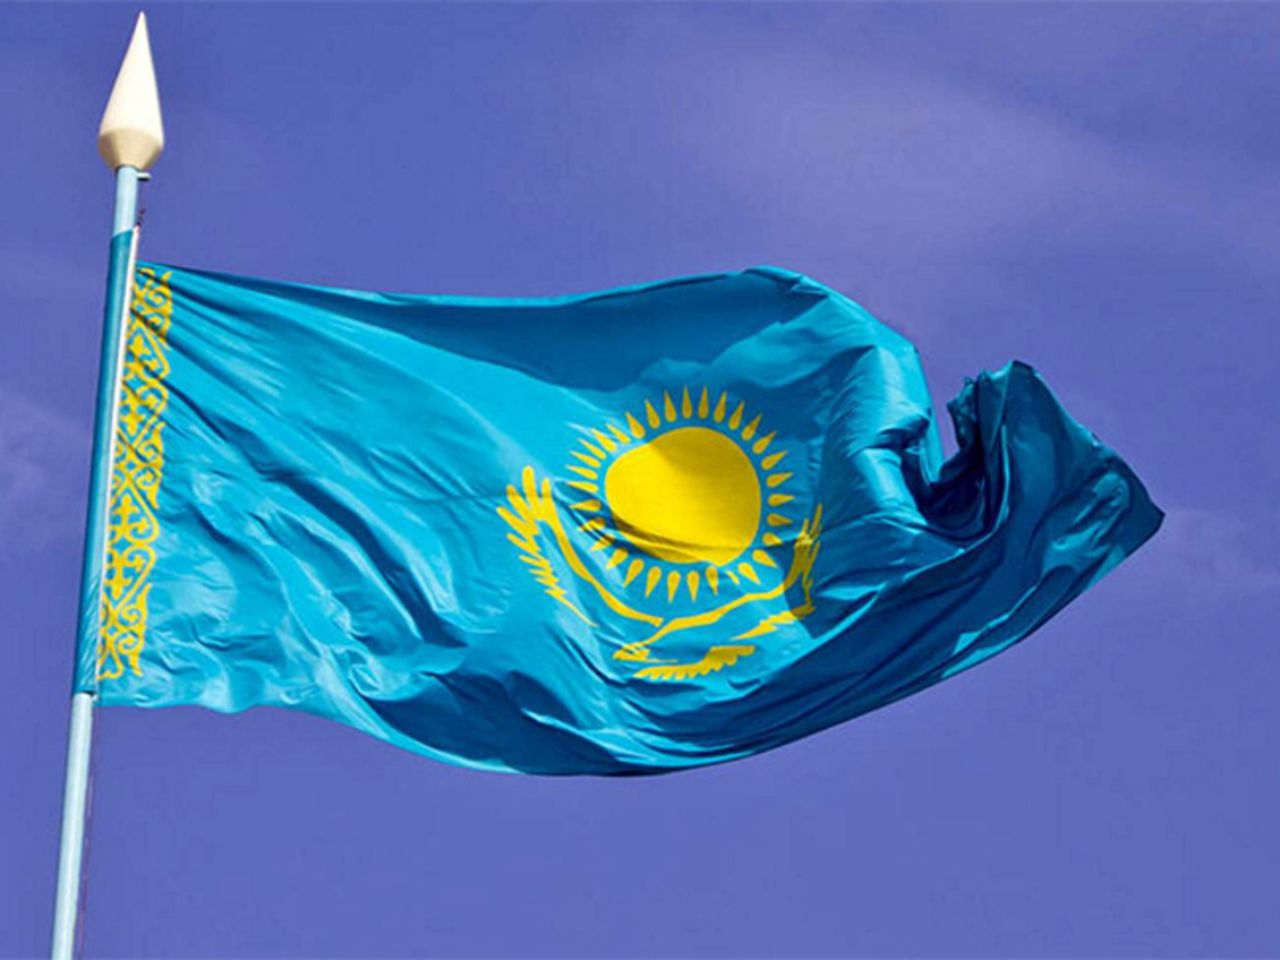 Tougher entry rules for foreigners come into force in Kazakhstan